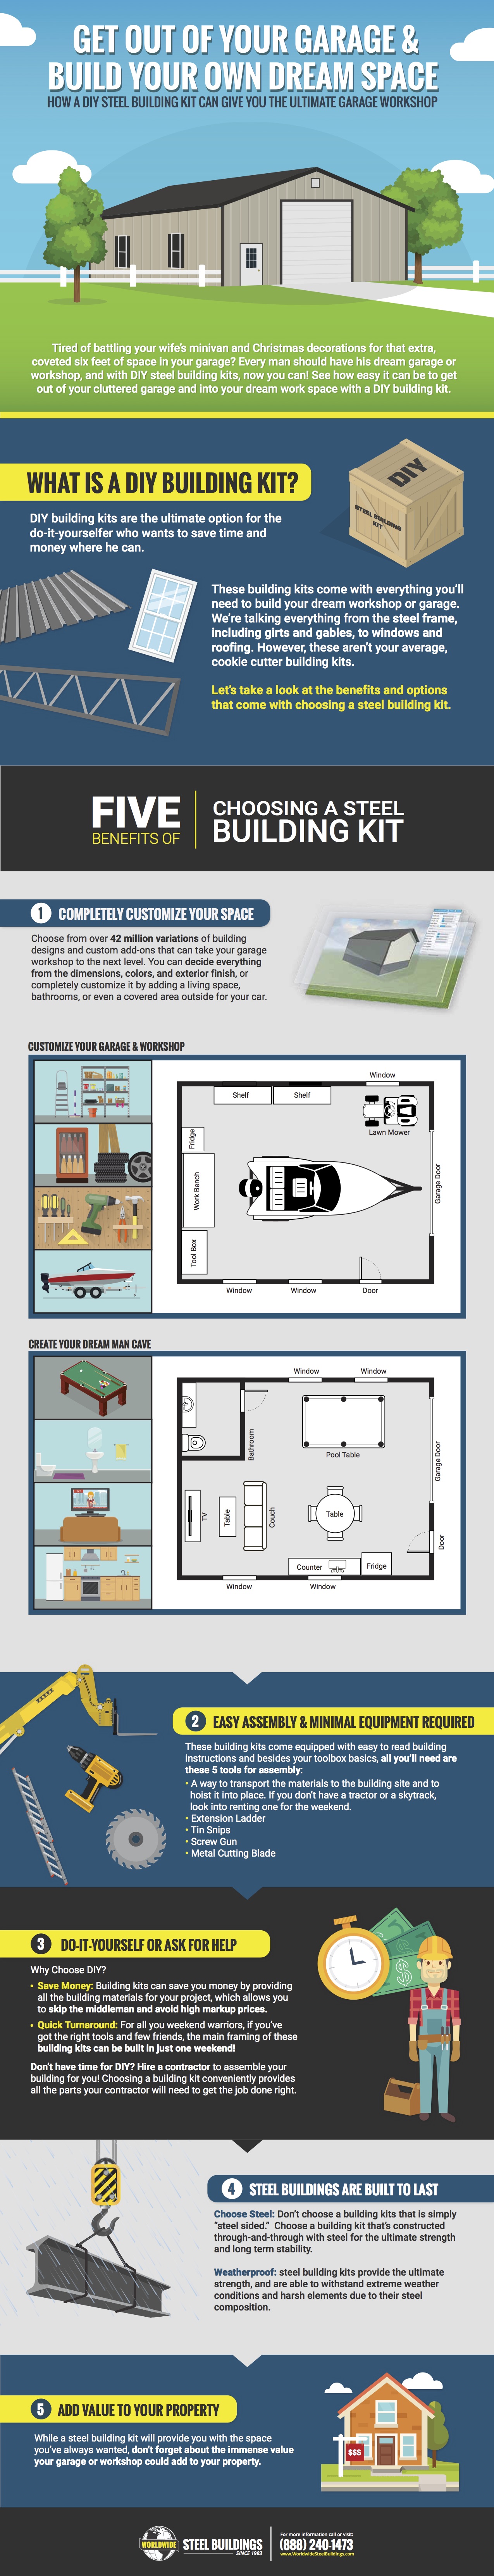 WWSB-Build-Your-Dream-Garage-Infographic